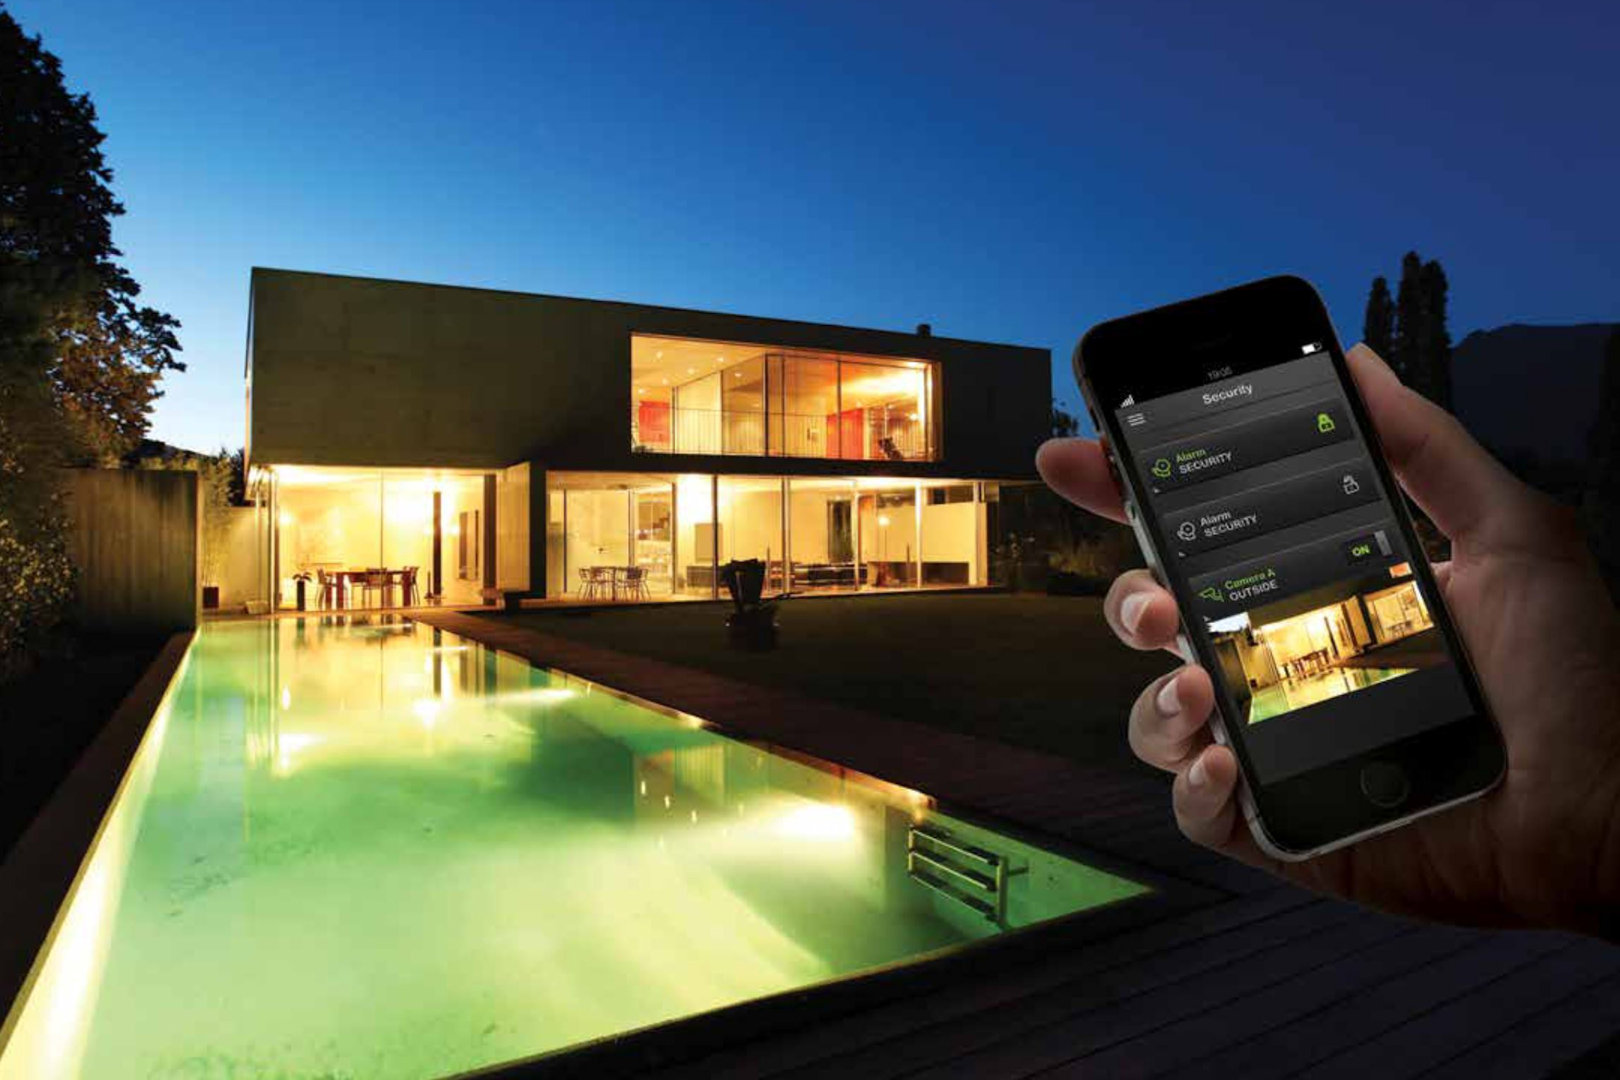 controlling clipsal cbus lighting with an iphone wiser app